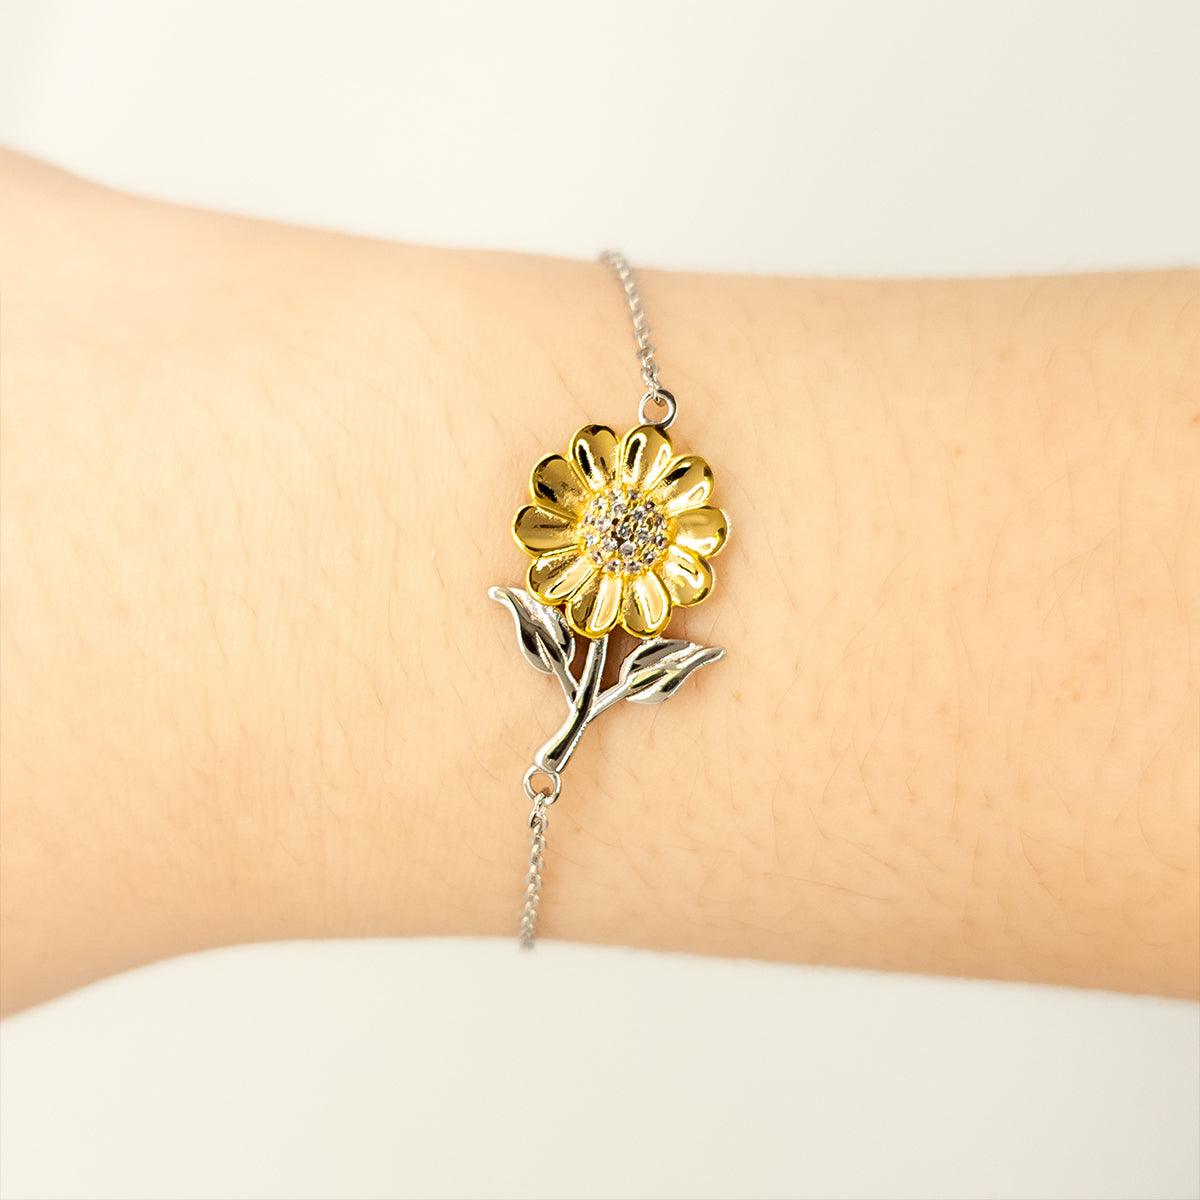 Microbiologist Sunflower Bracelet - Thanks for being who you are - Birthday Christmas Jewelry Gifts Coworkers Colleague Boss - Mallard Moon Gift Shop